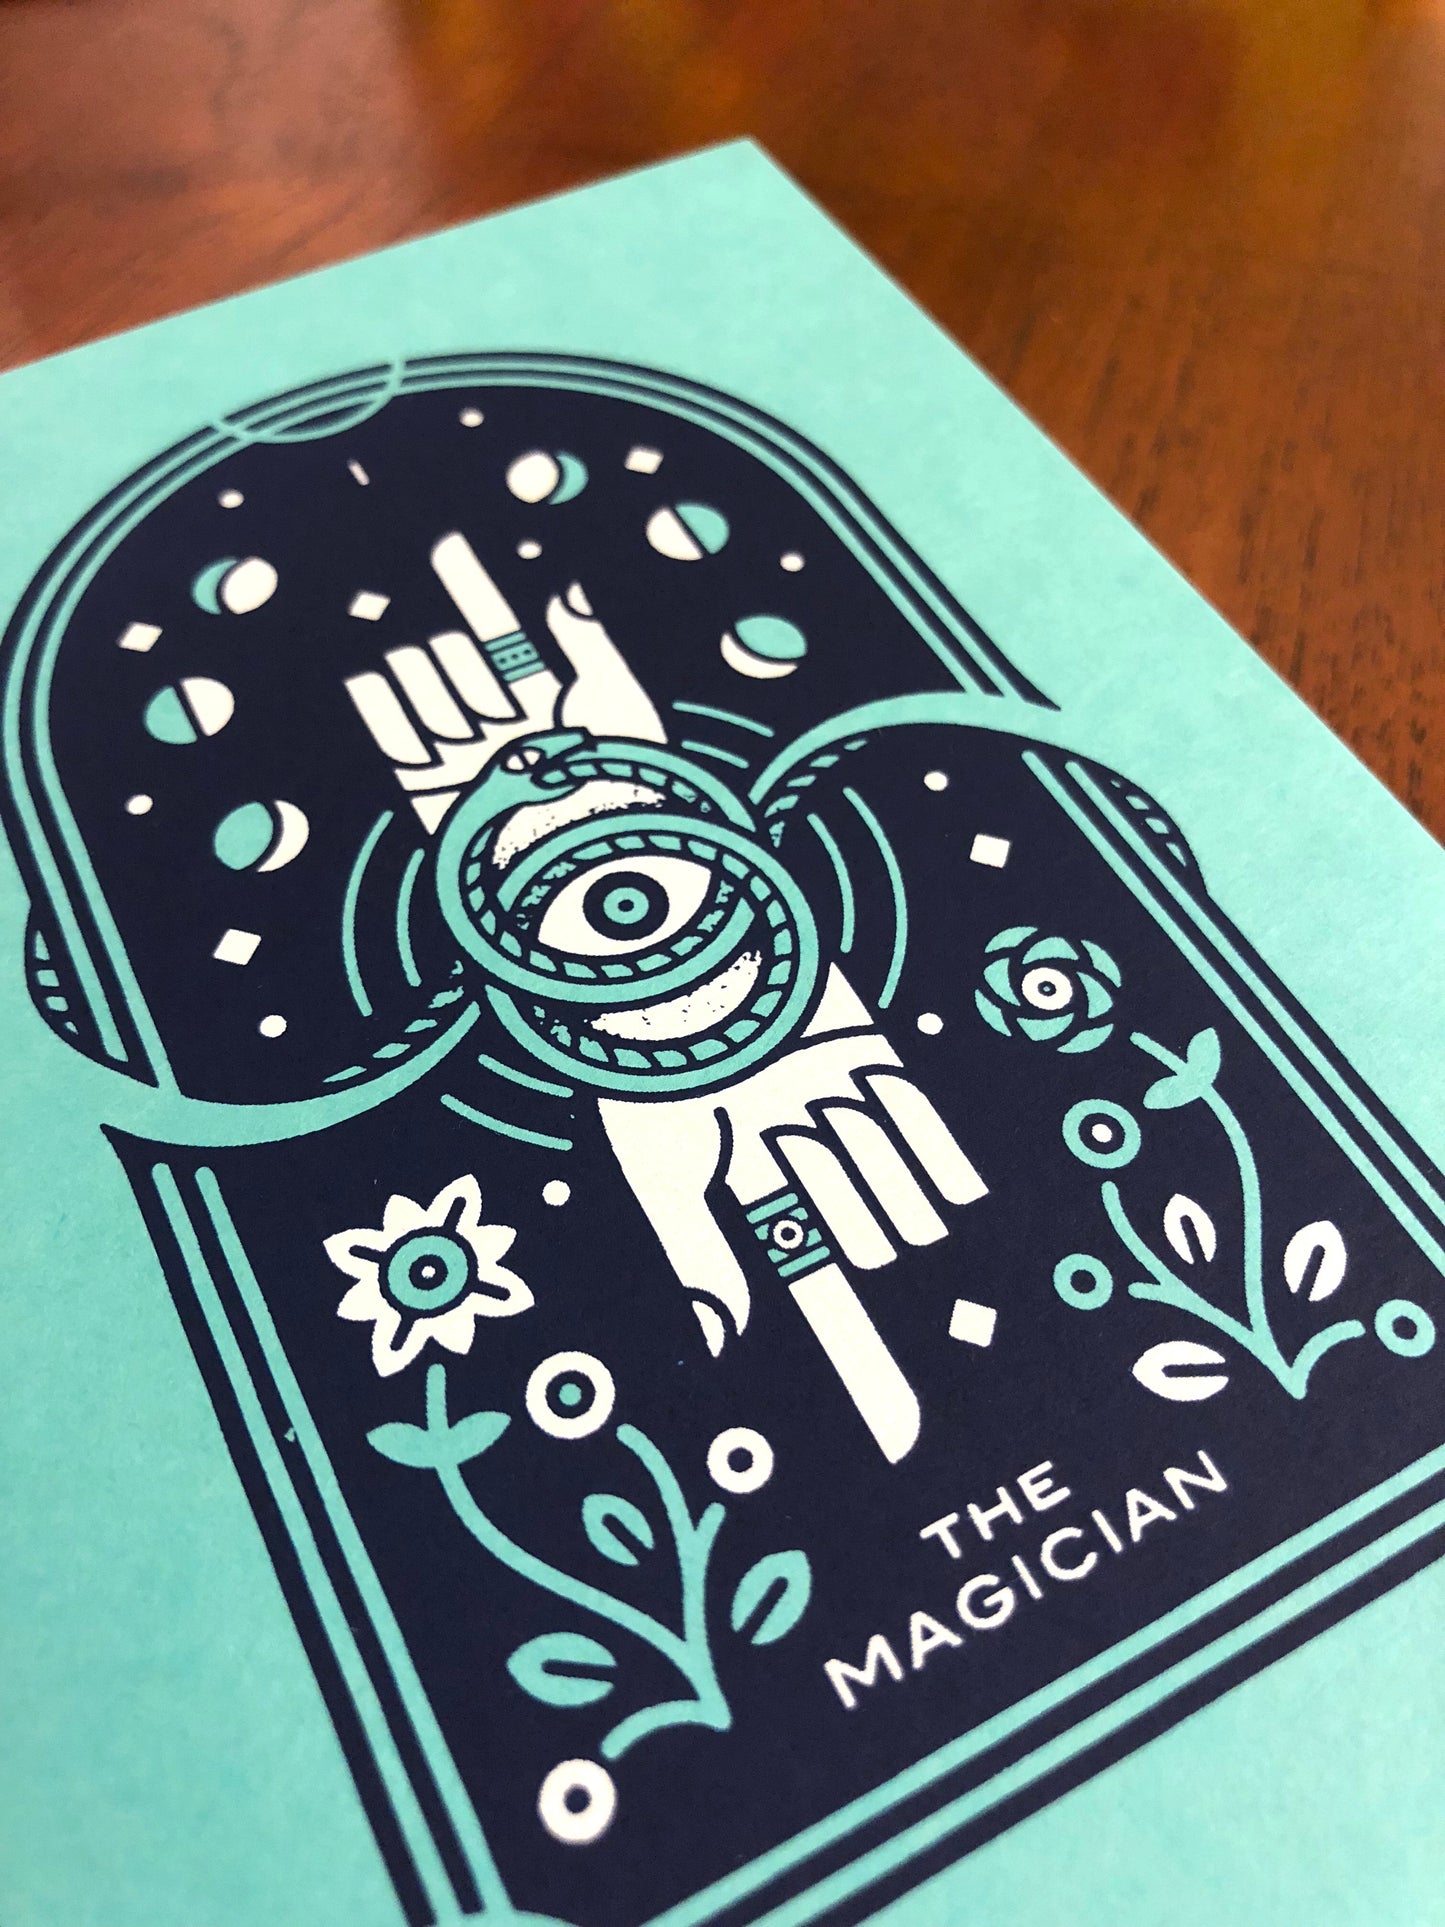 Tarot: The Magician - Blank 4x6 Folding Card with Envelope